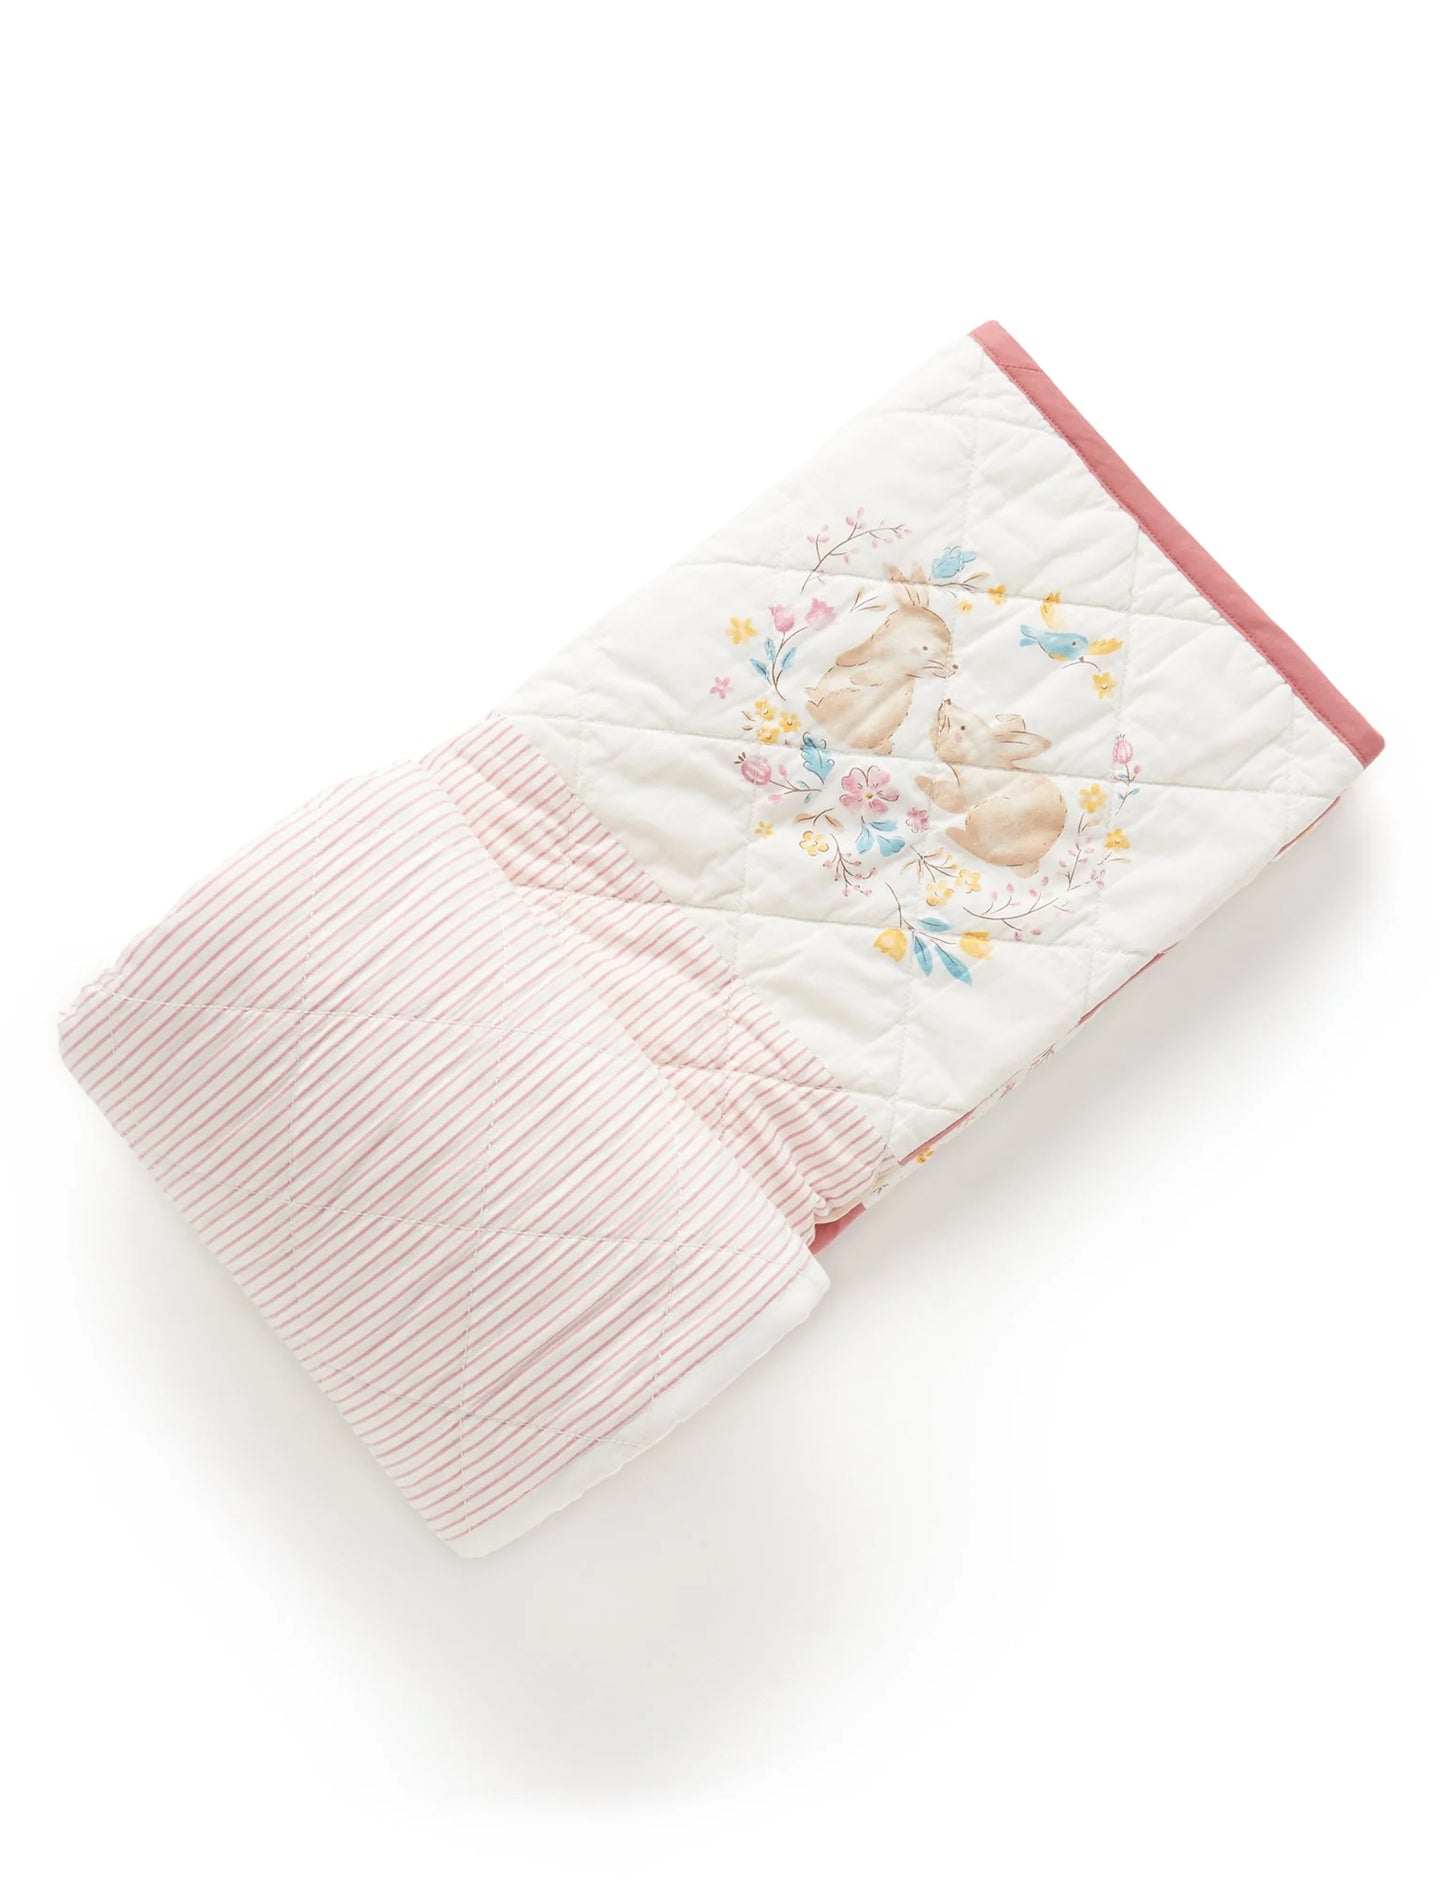 Reversible Quilted Coverlet